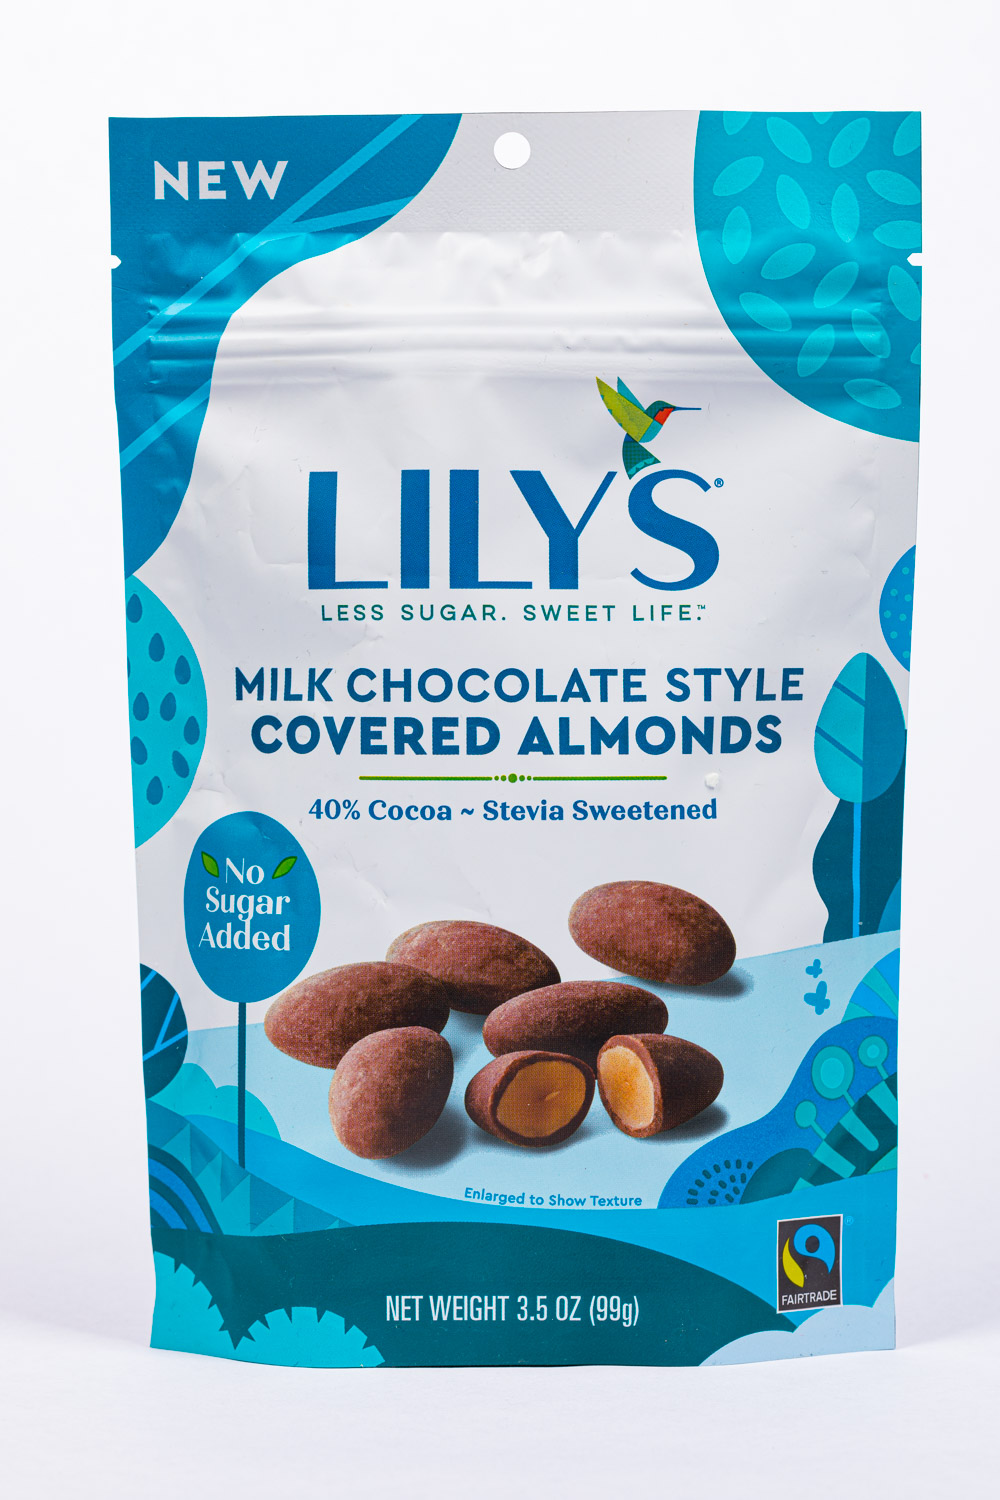 Milk Chocolate Style Covered Almonds